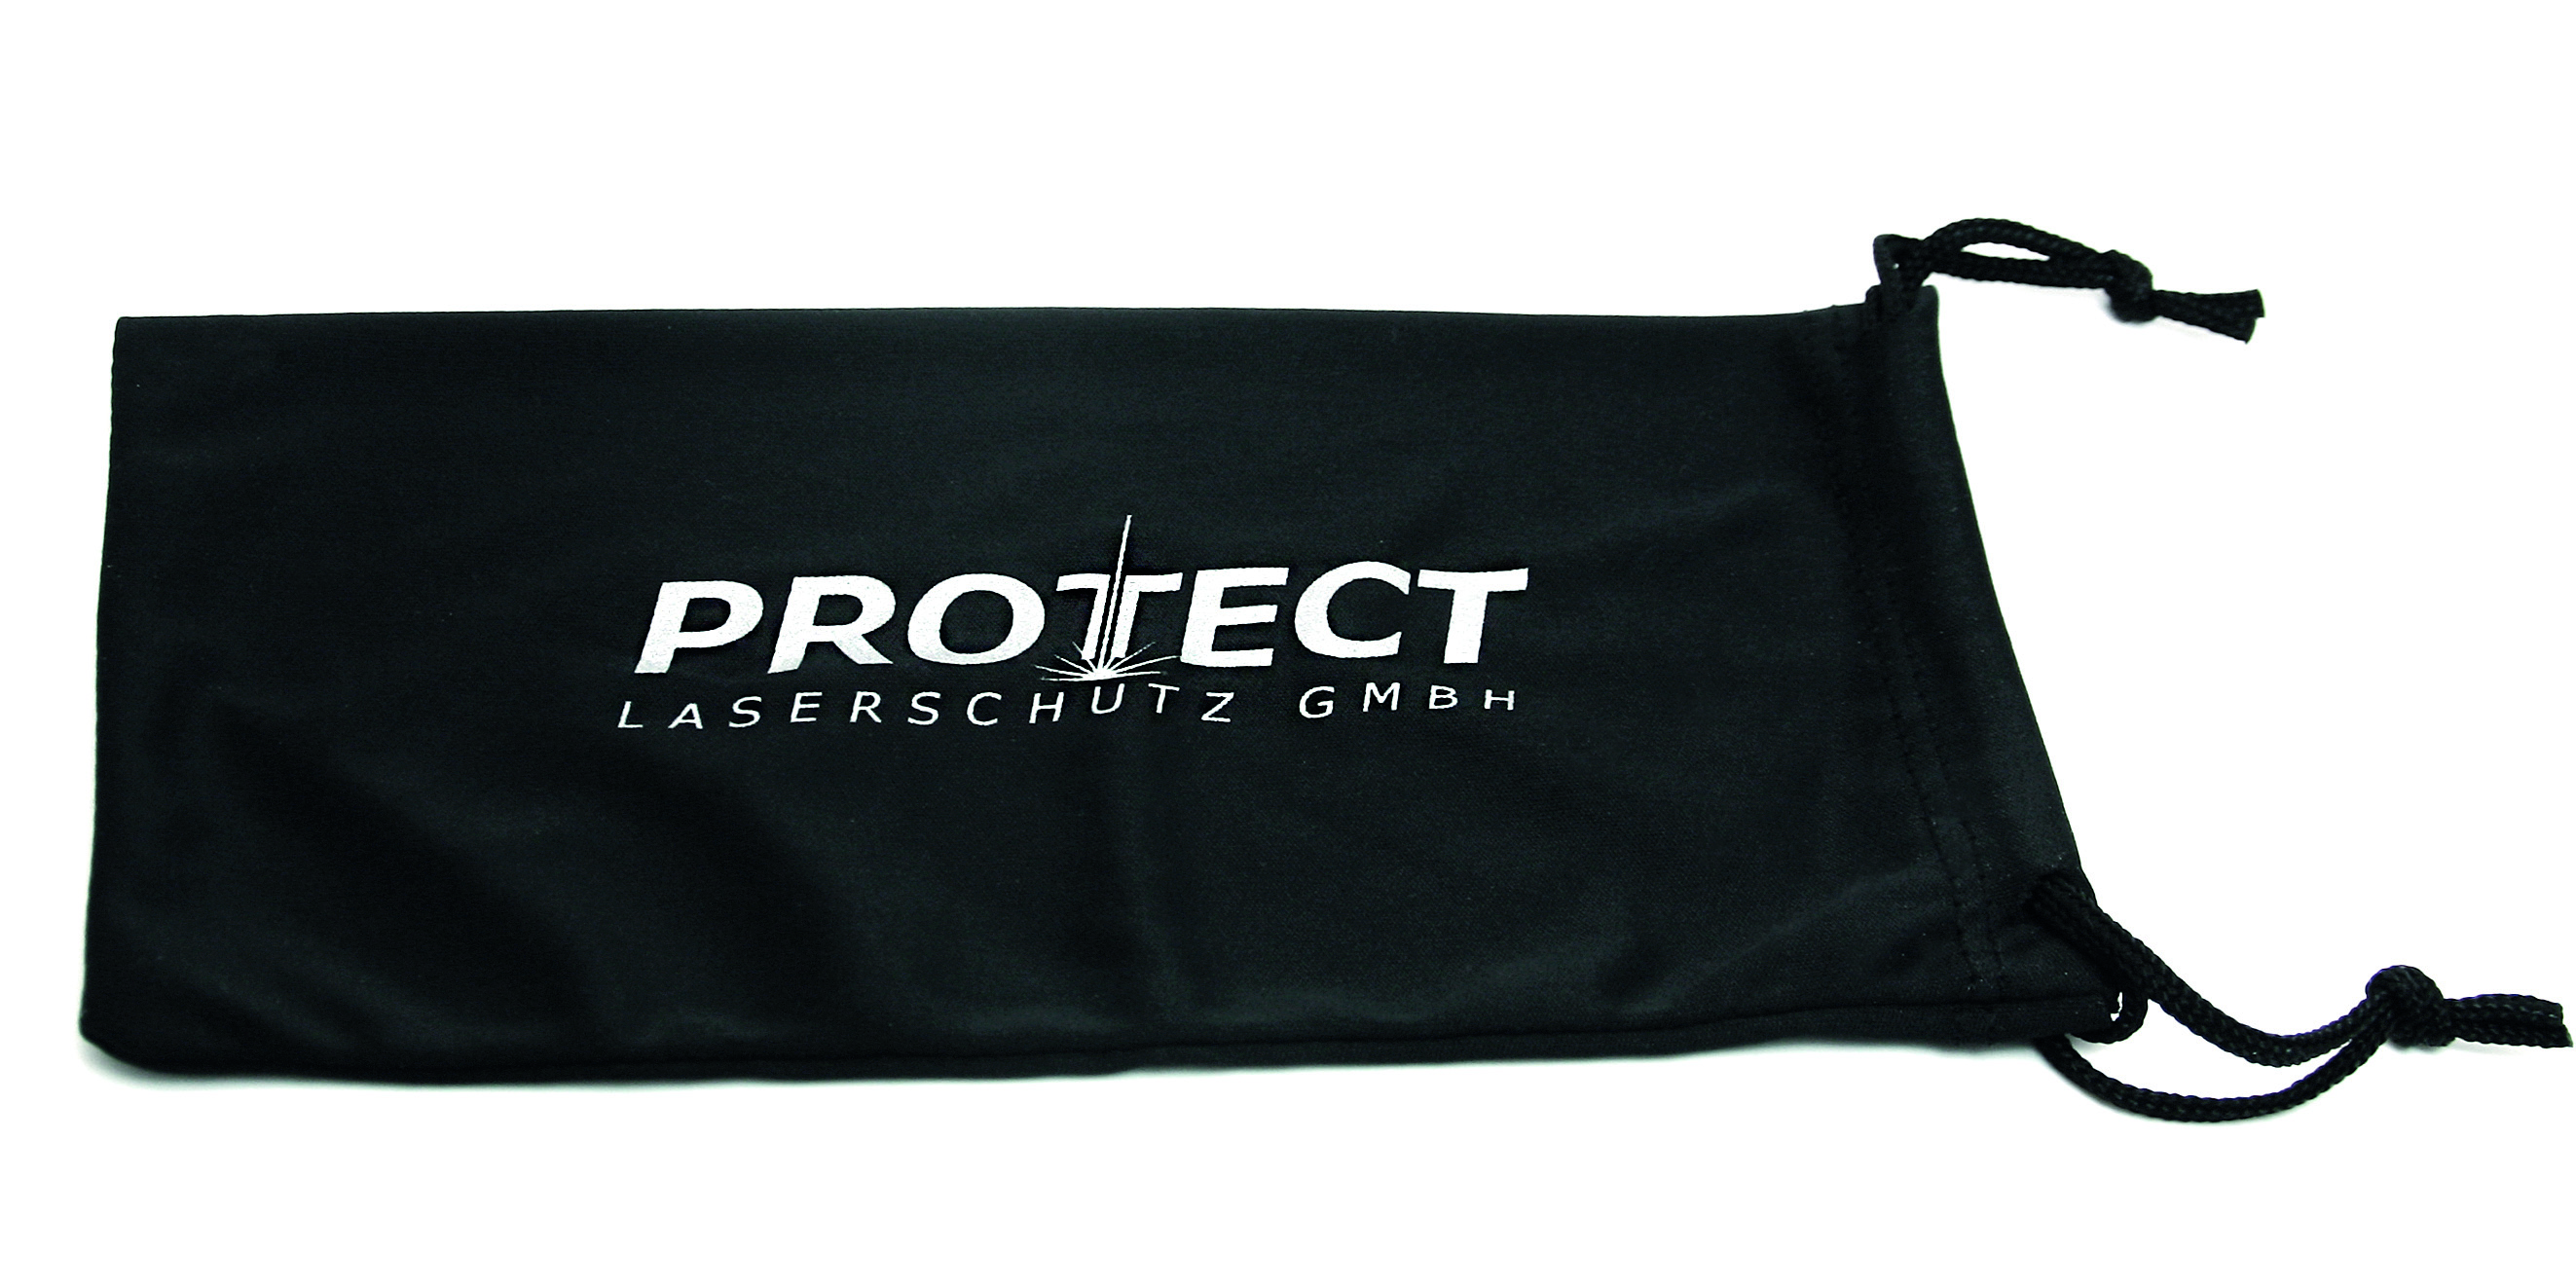 Large microfiber bag with PROTECT logo